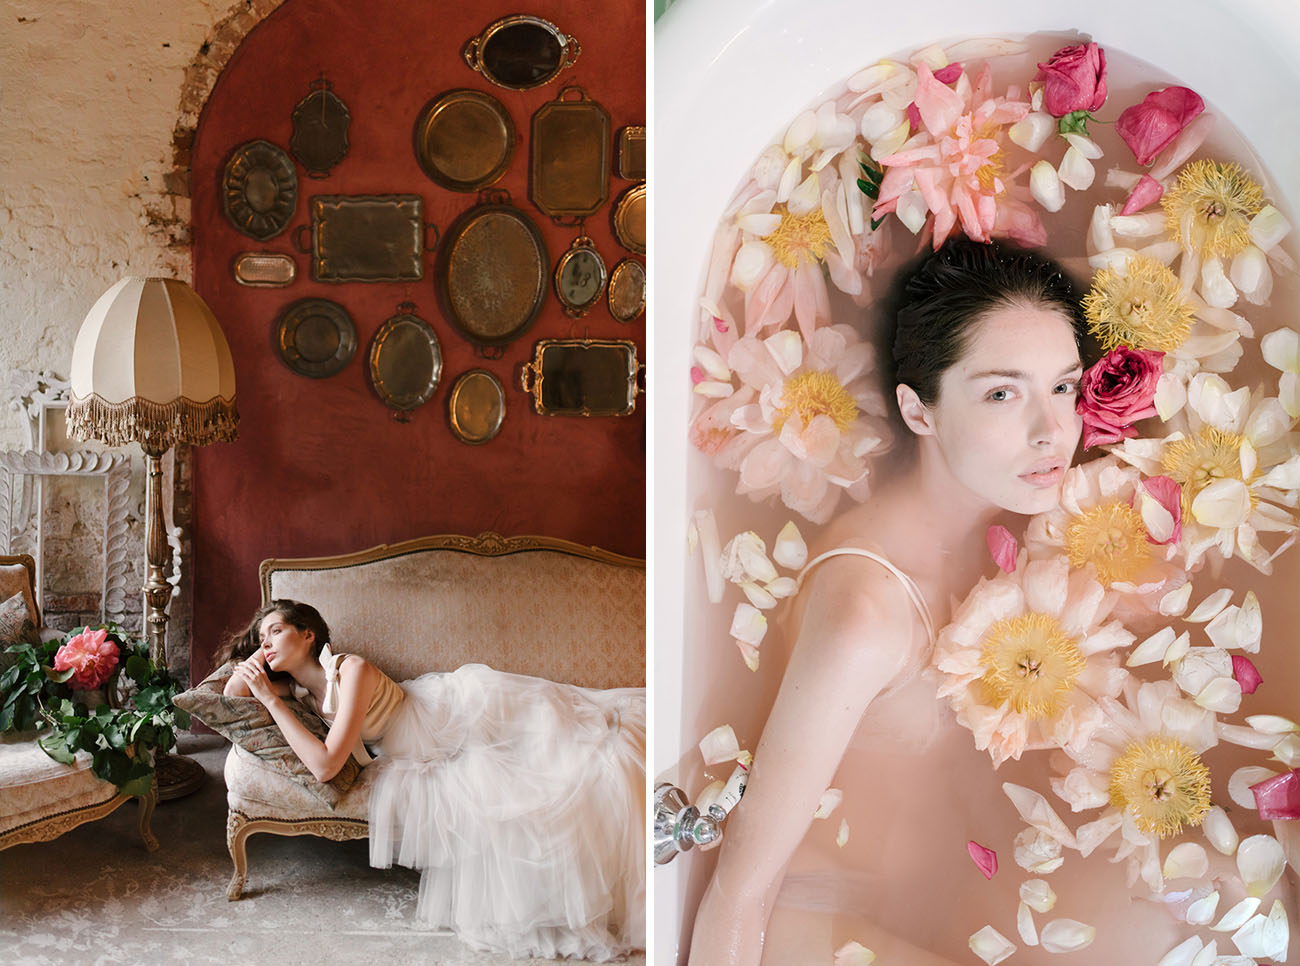 What better way to prep for your wedding day than by bathing in a tub of peonies and petals